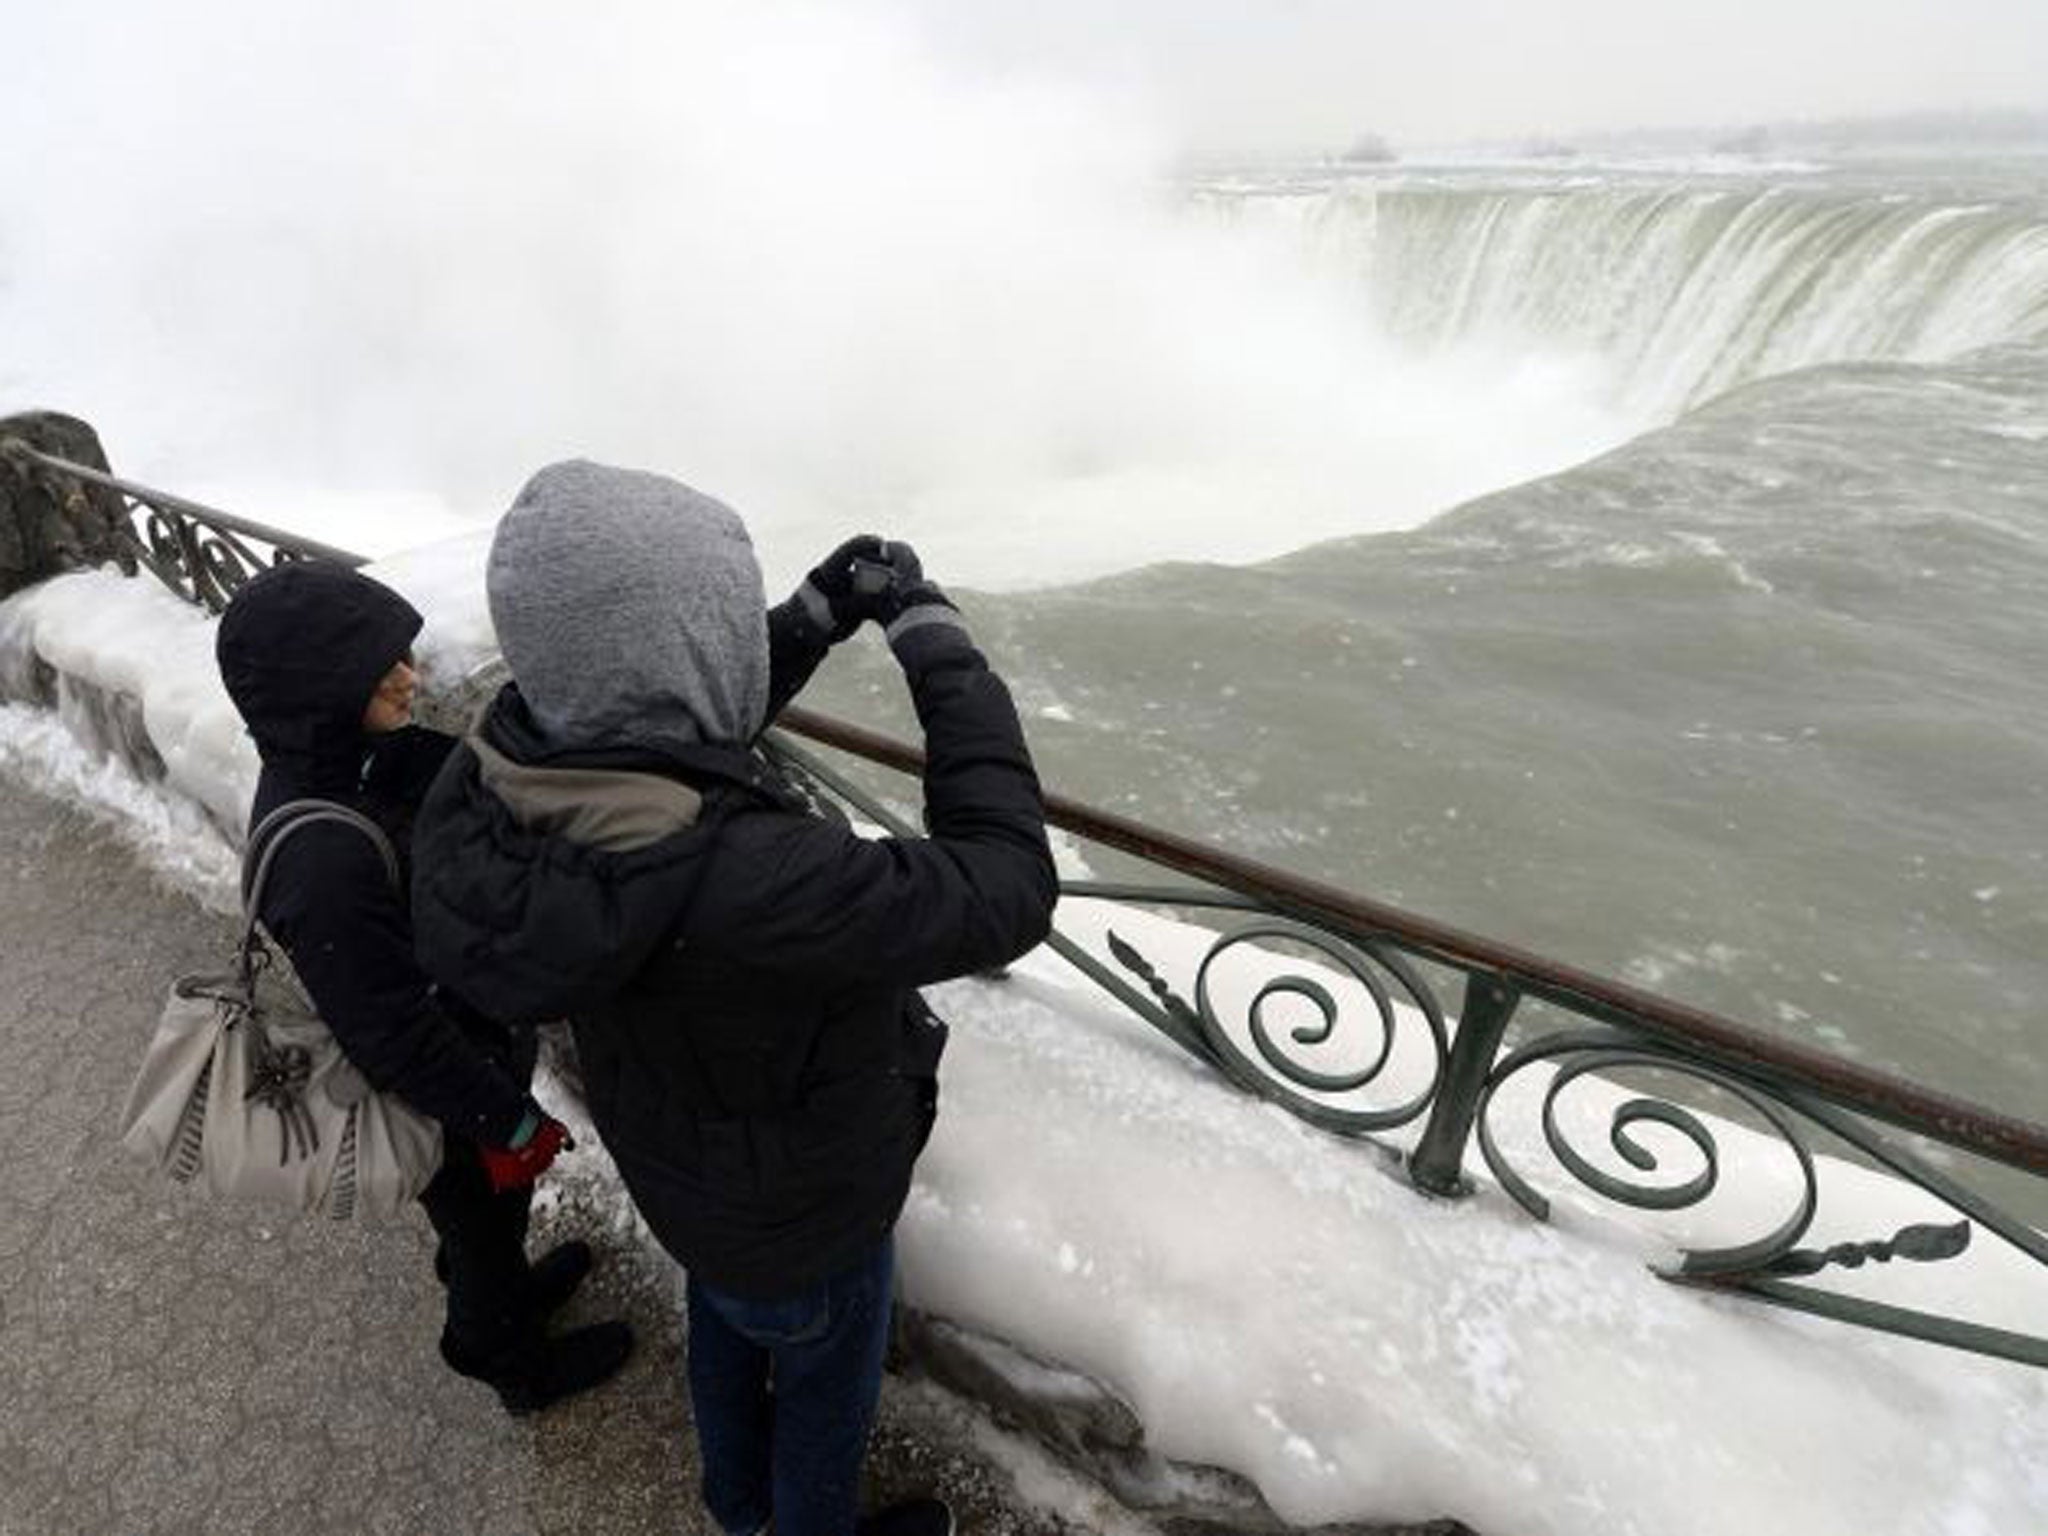 Visitors take pictures overlooking the falls in Niagara Falls in Ontario